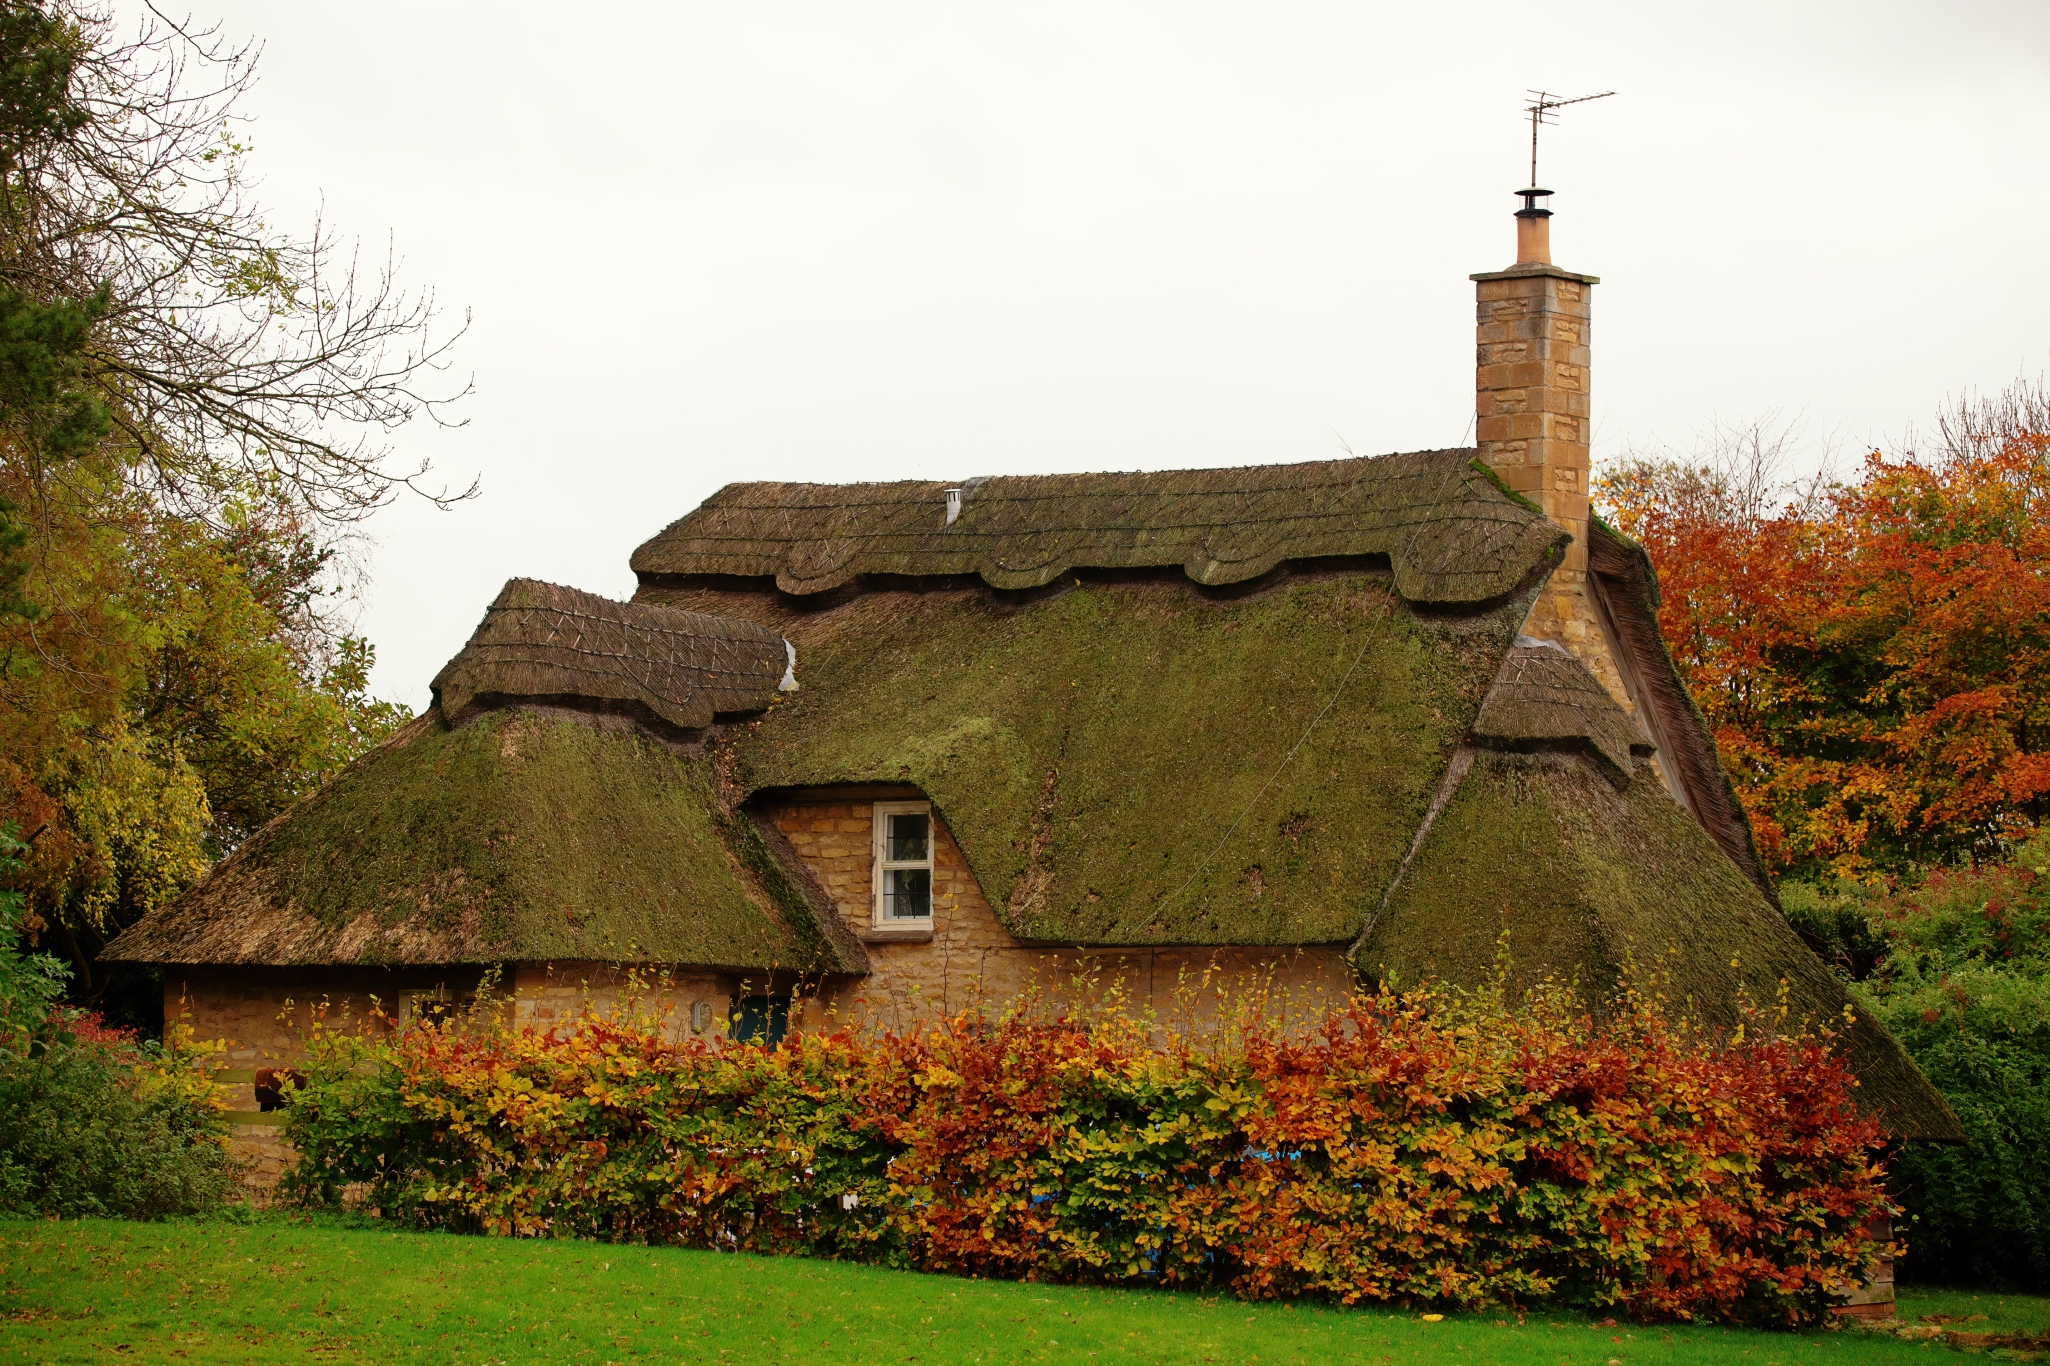 Thatched cottage surrounded by shrubbery